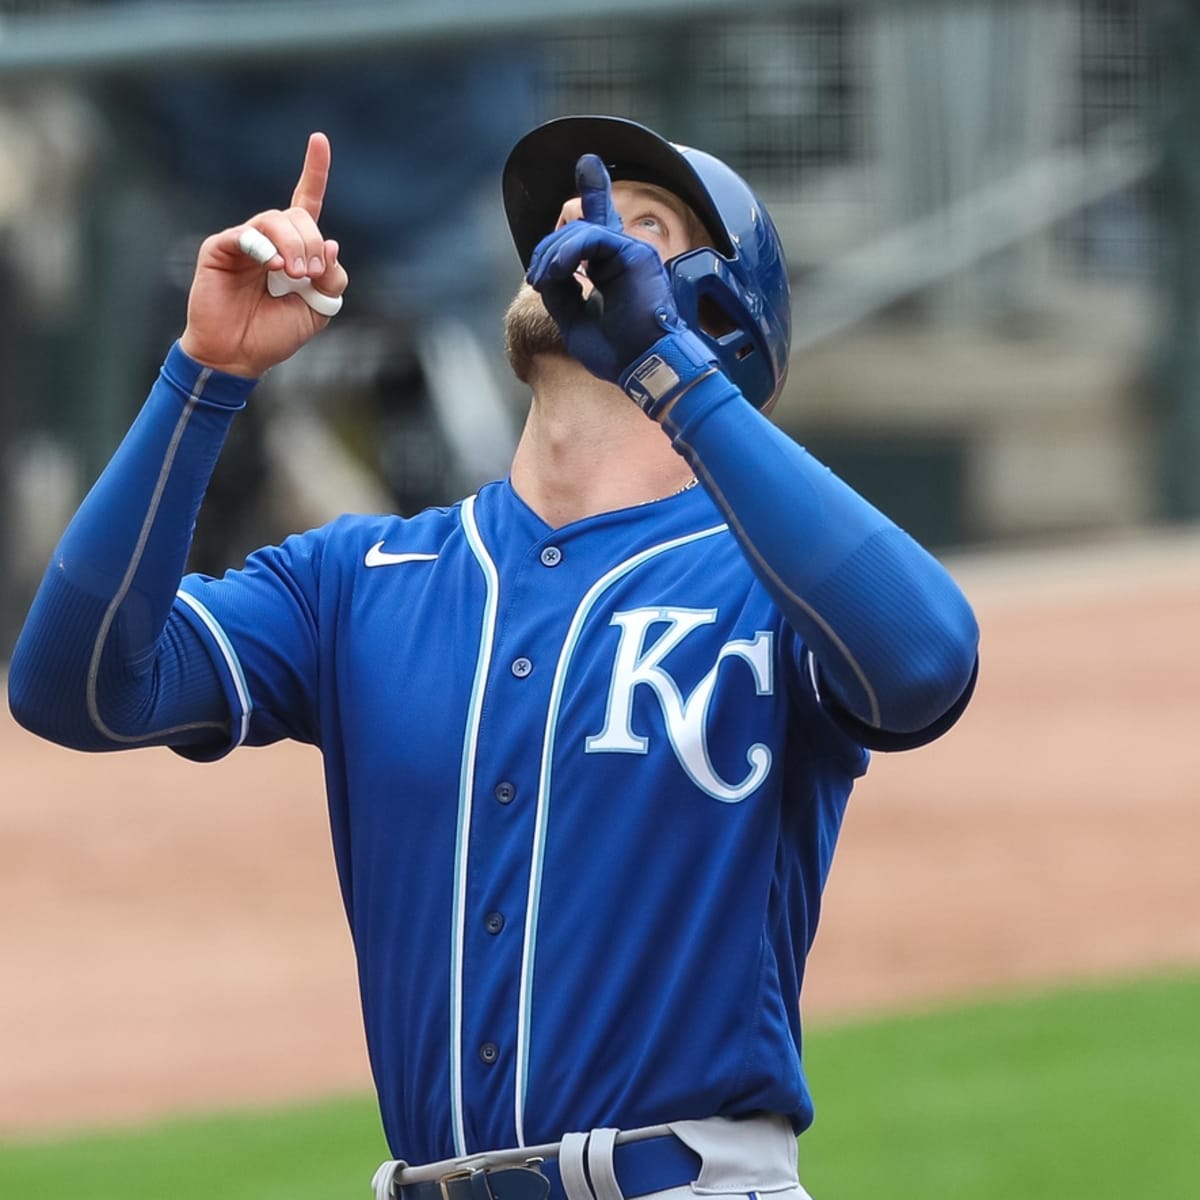 Baseball needs more color variety in their jerseys - Royals Review